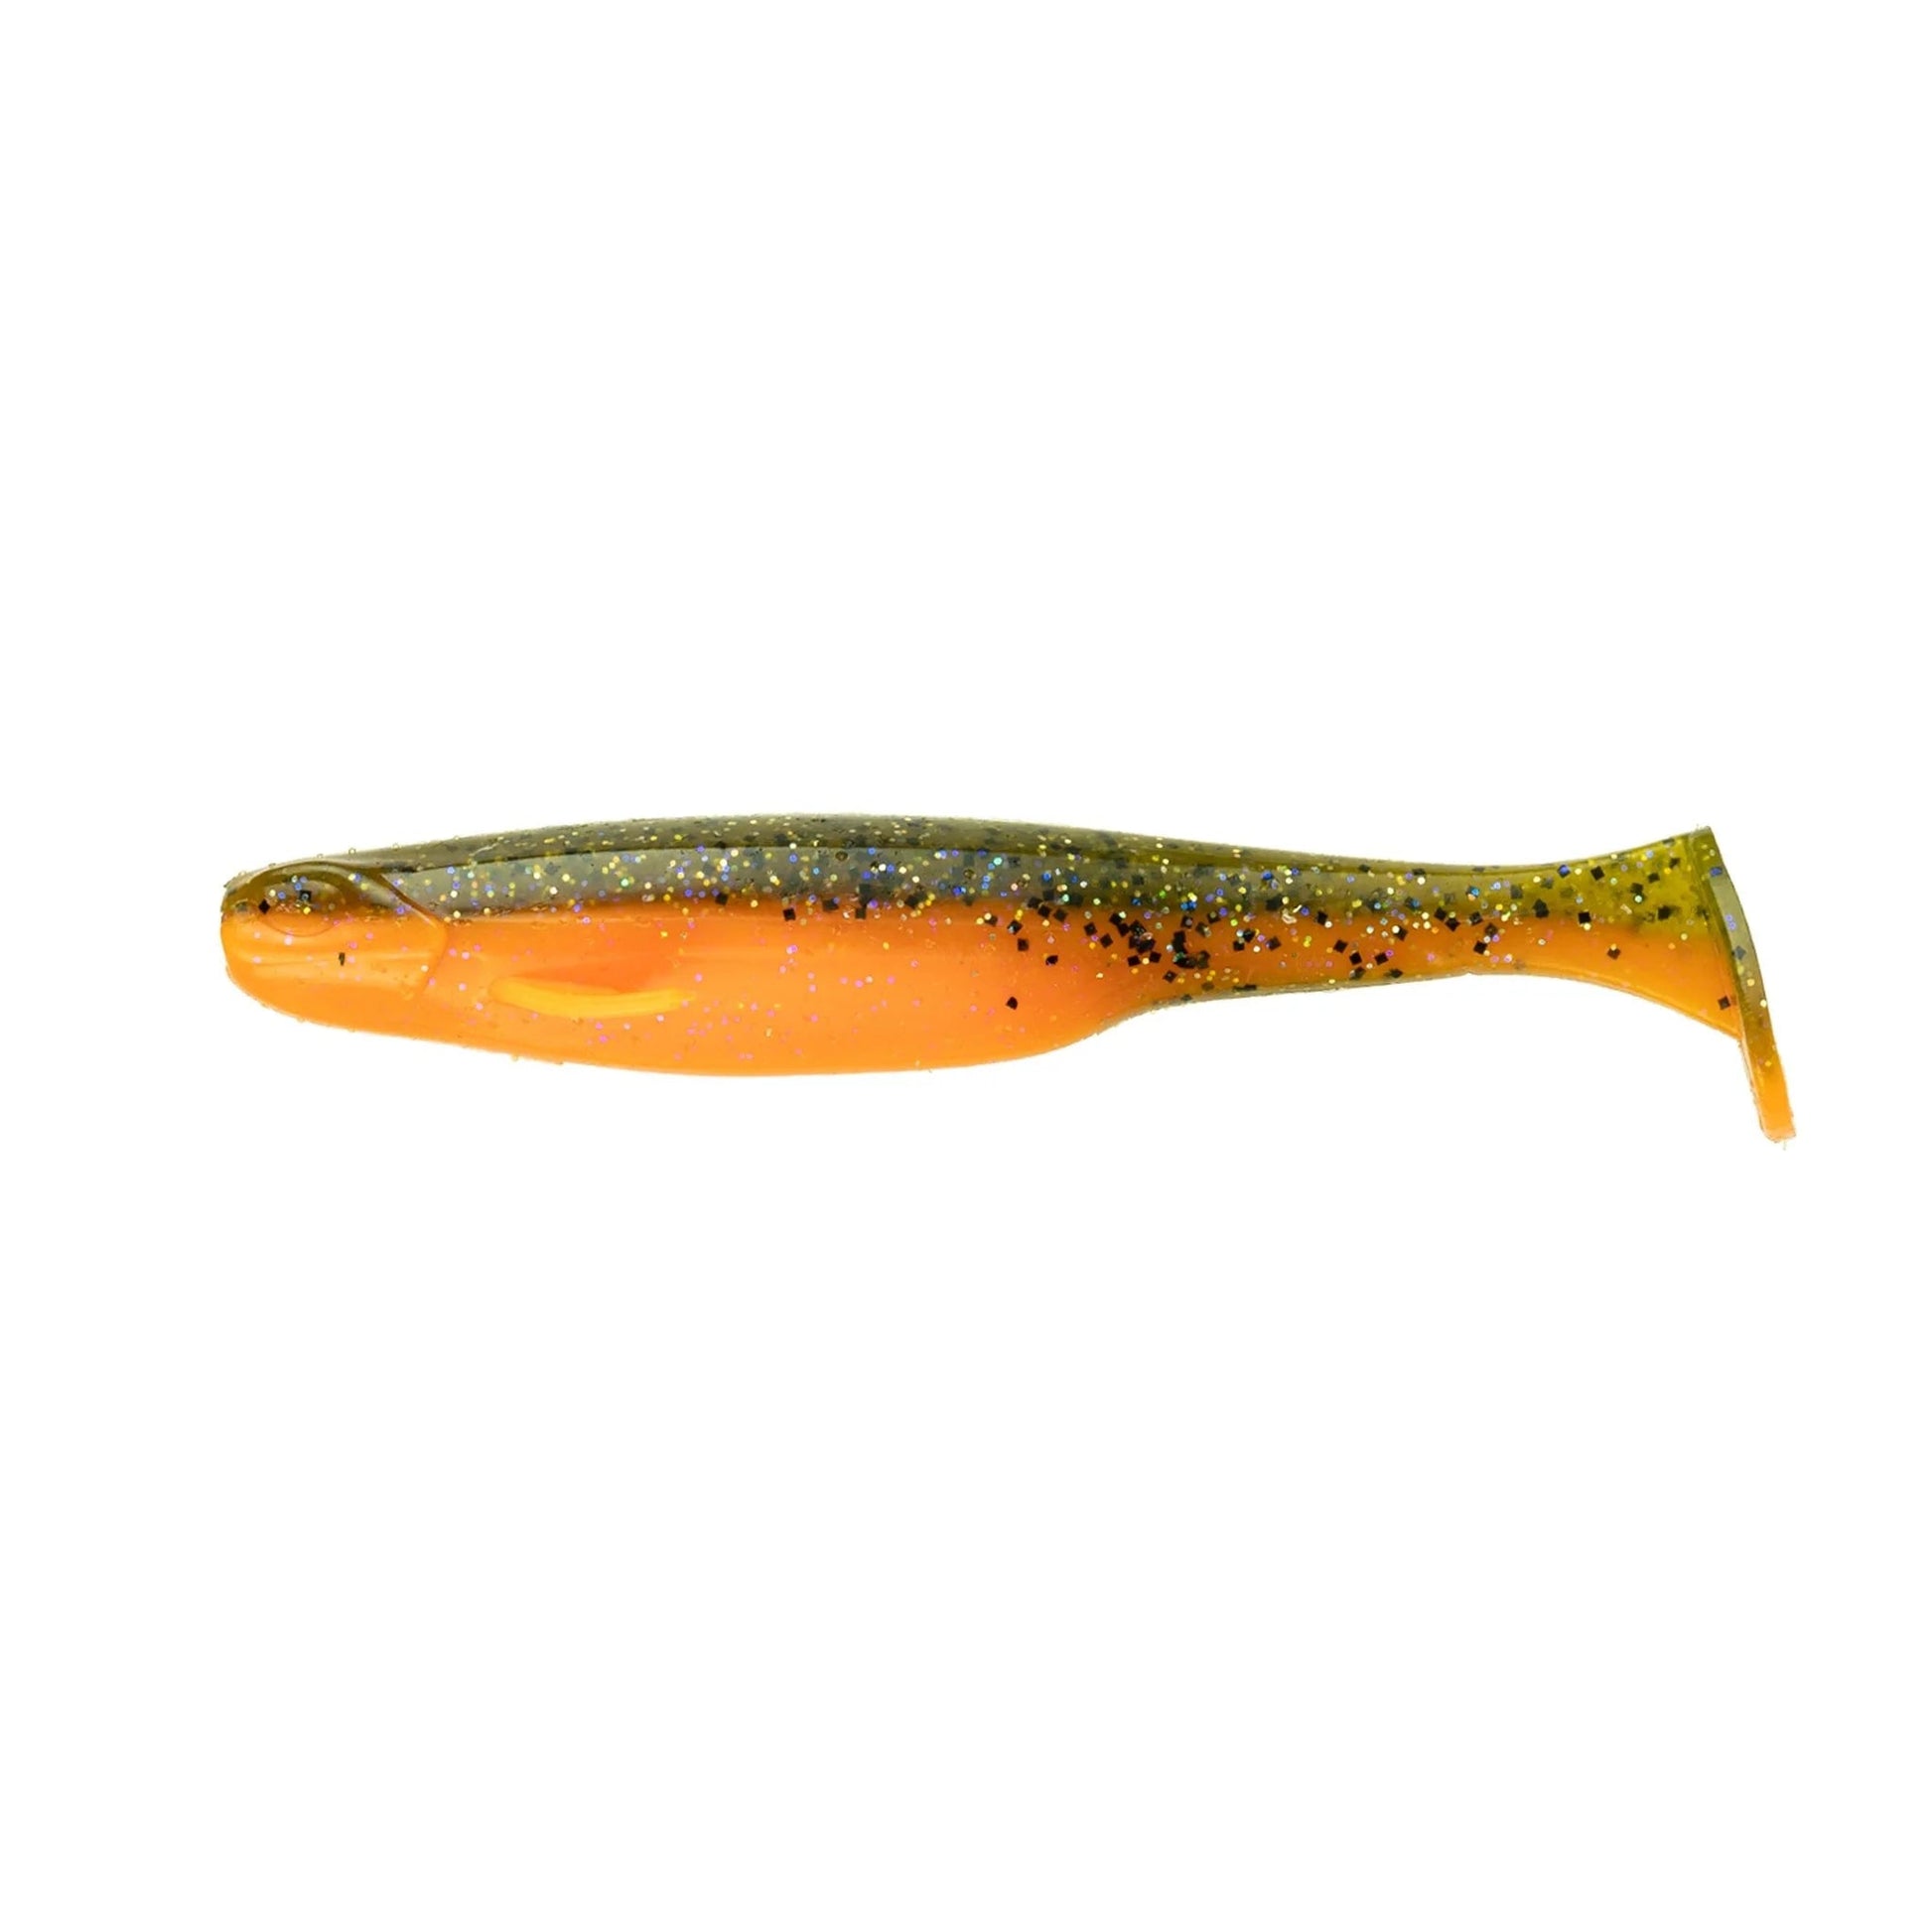 6th Sense Whale Swimbait - Angler's Pro Tackle & Outdoors